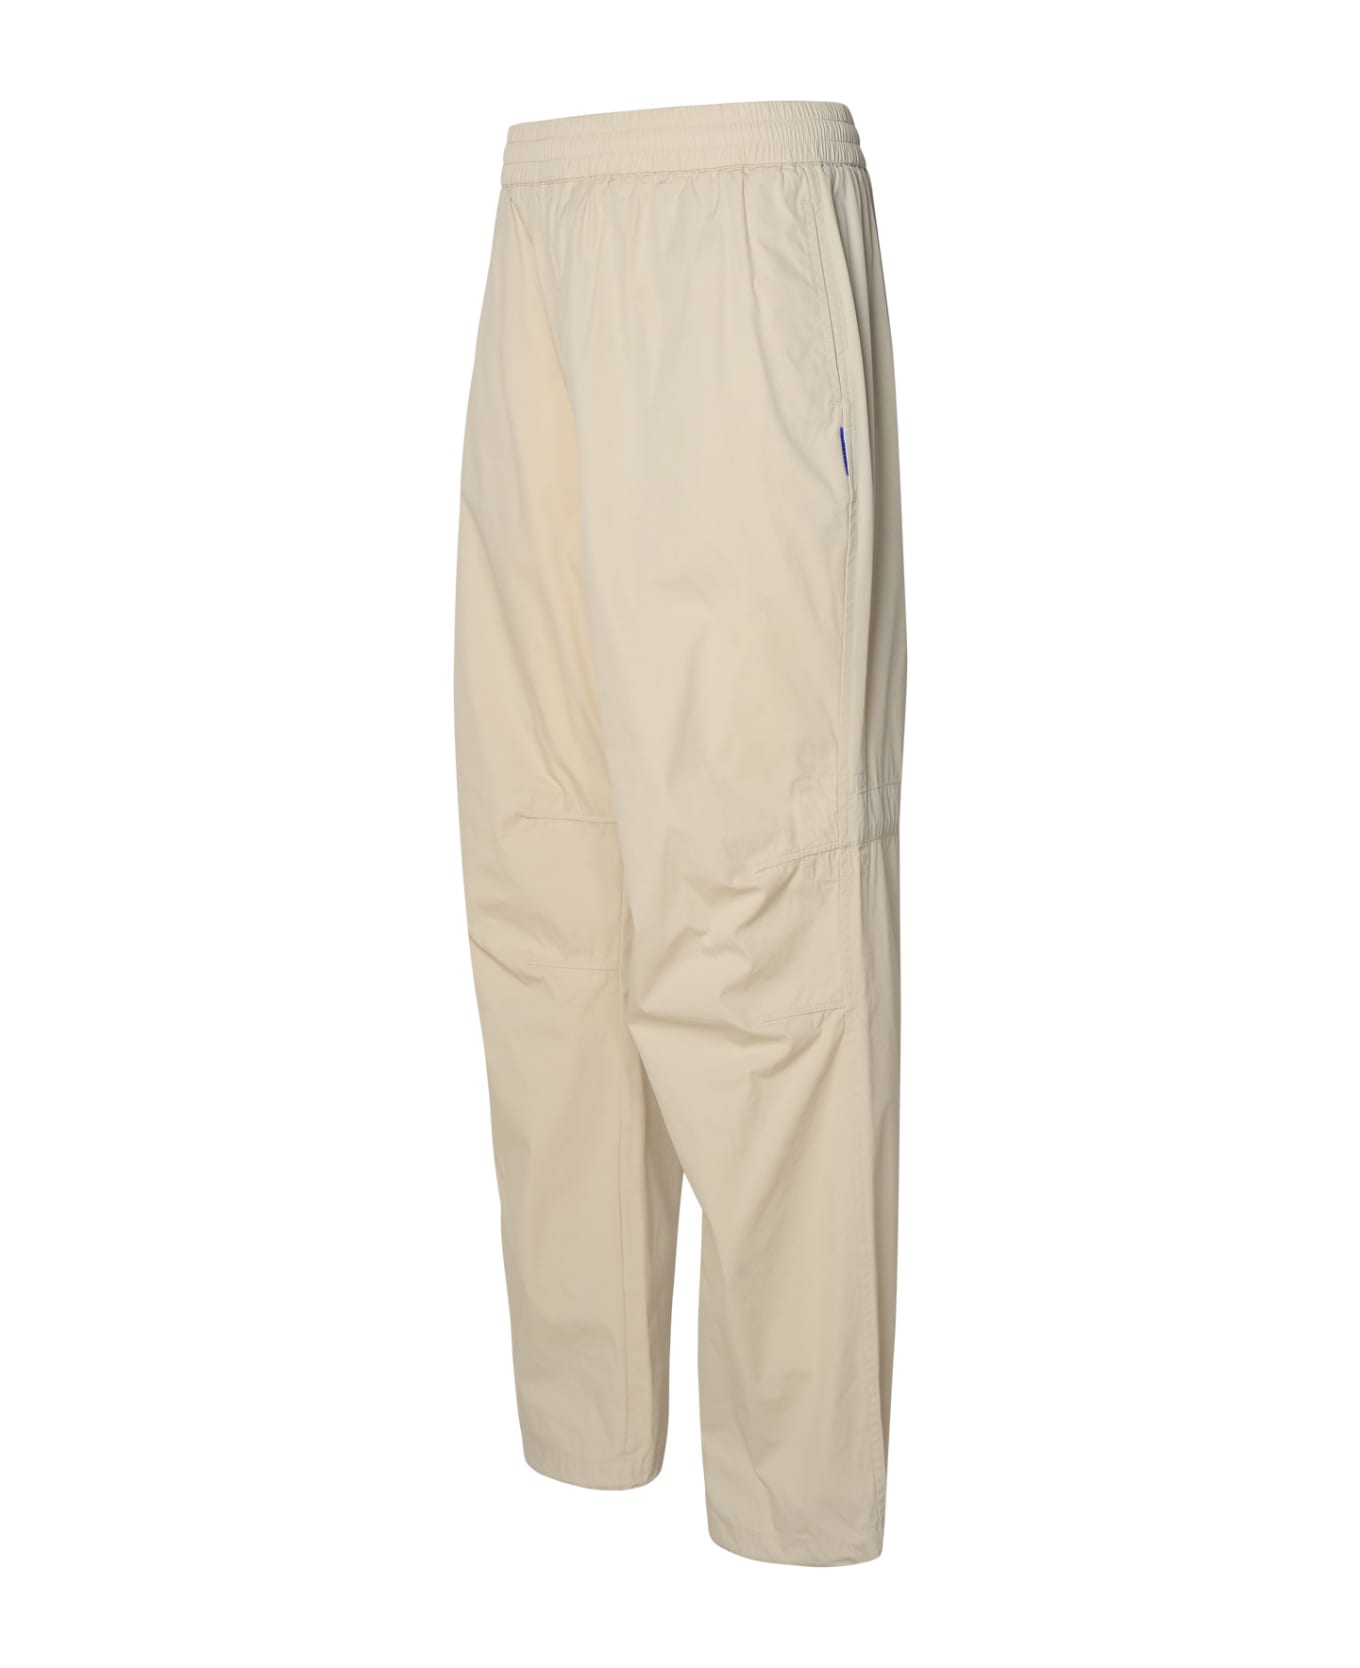 Burberry Beige Cotton Blend Trousers - Wheat